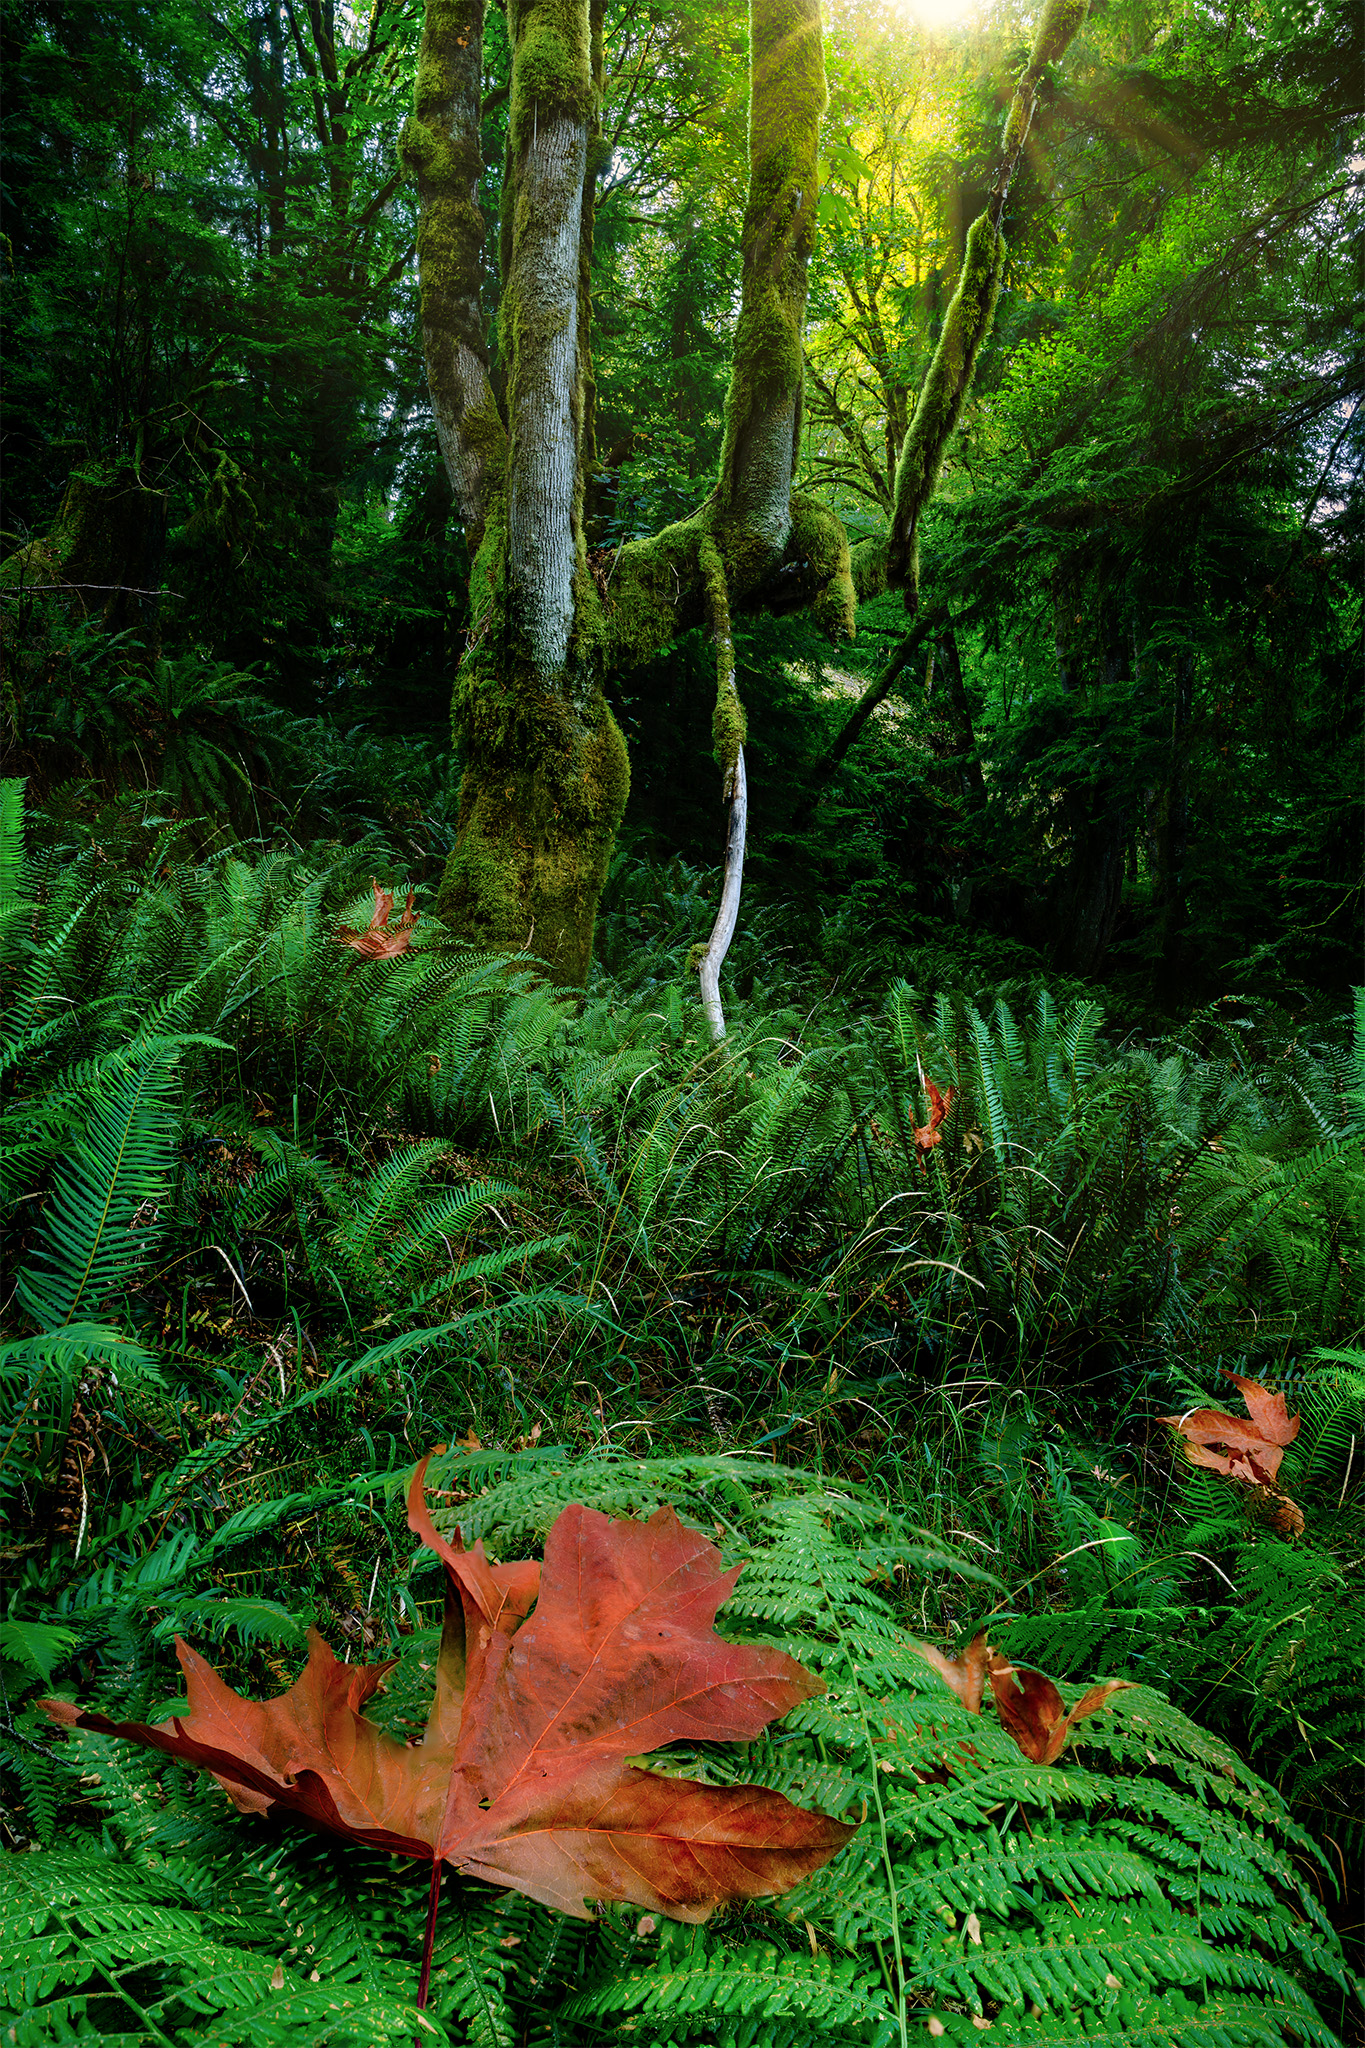 A moss covered maple tree in British Columbia with green ferns and dead leaves in the foreground